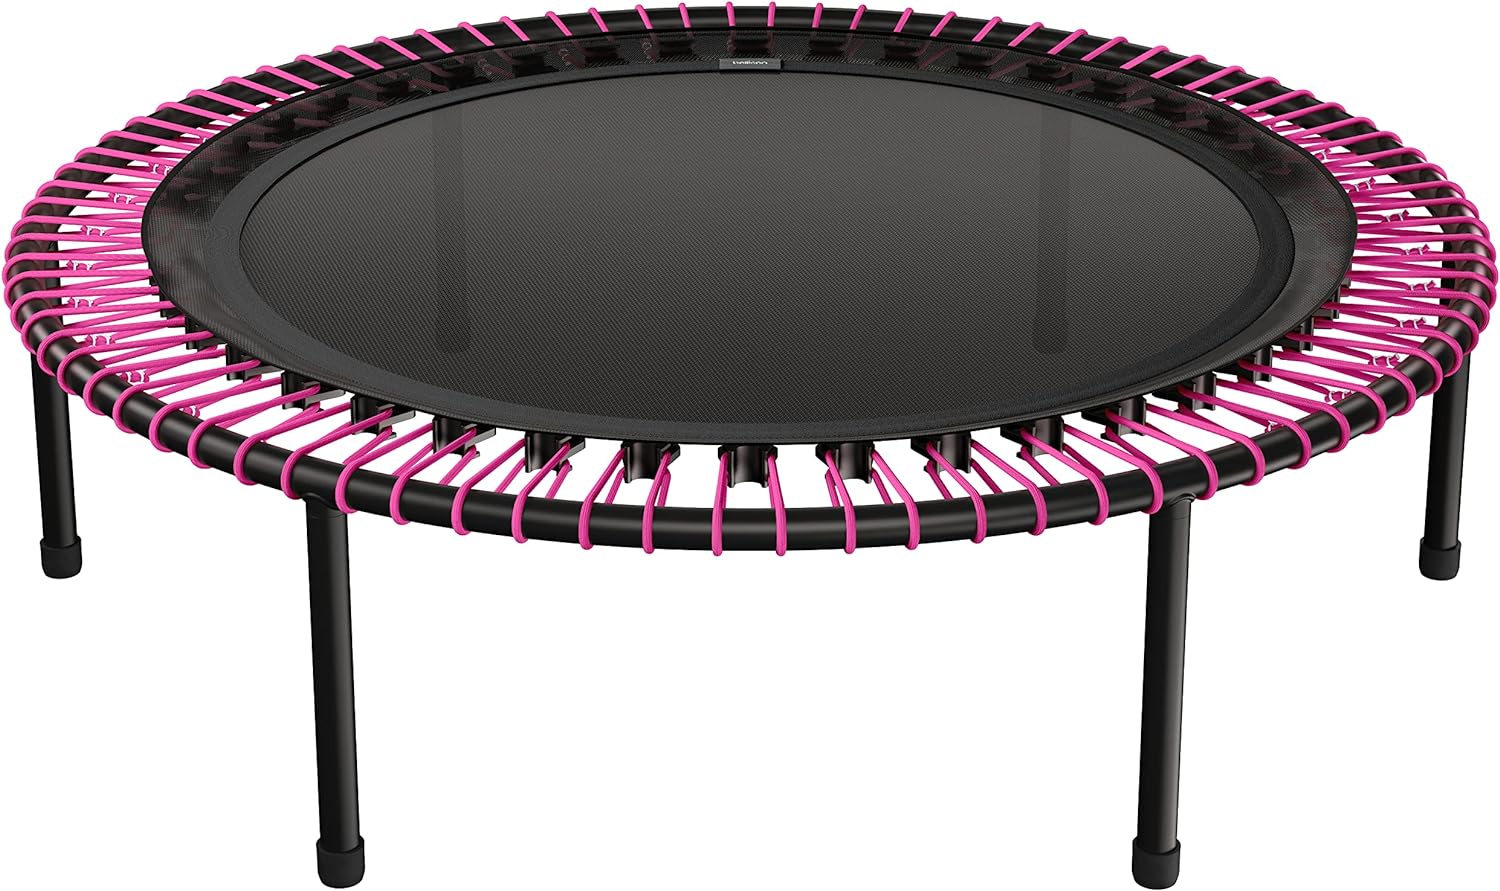 Bellicon Classic 100 Trampoline Screw-on Legs Rebounder Fitness Trampoline Low-impact Exercise Home Gym Equipment Mini Trampoline Health and Wellness Cardio Workout Joint-friendly Exercise Spring-loaded Trampoline Indoor Trampoline Premium Rebounder